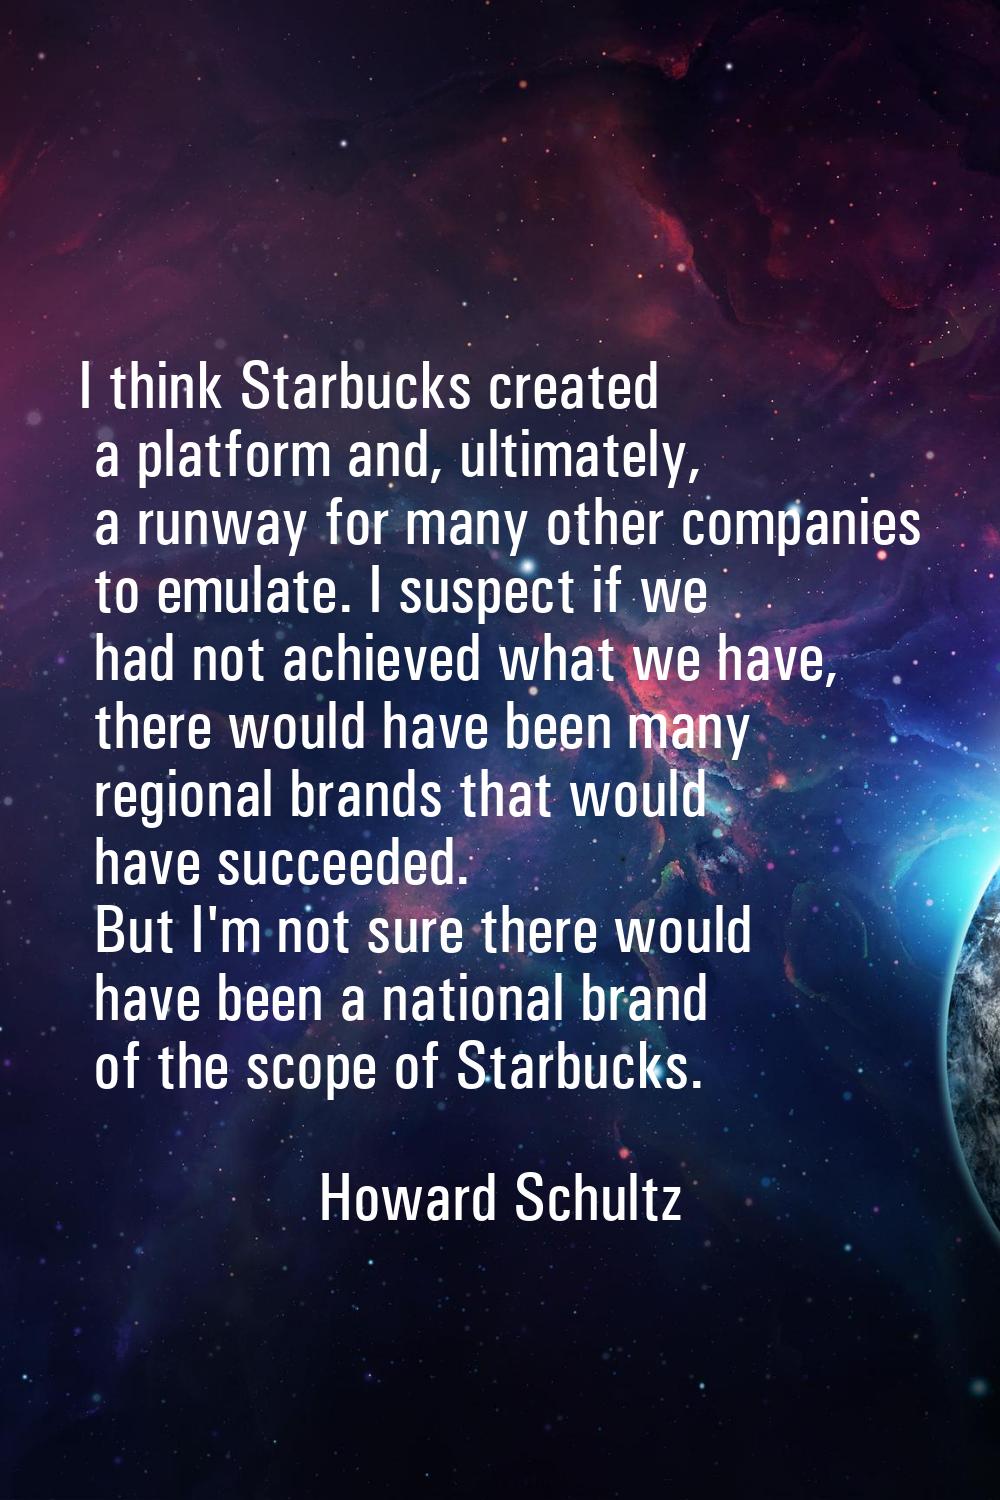 I think Starbucks created a platform and, ultimately, a runway for many other companies to emulate.